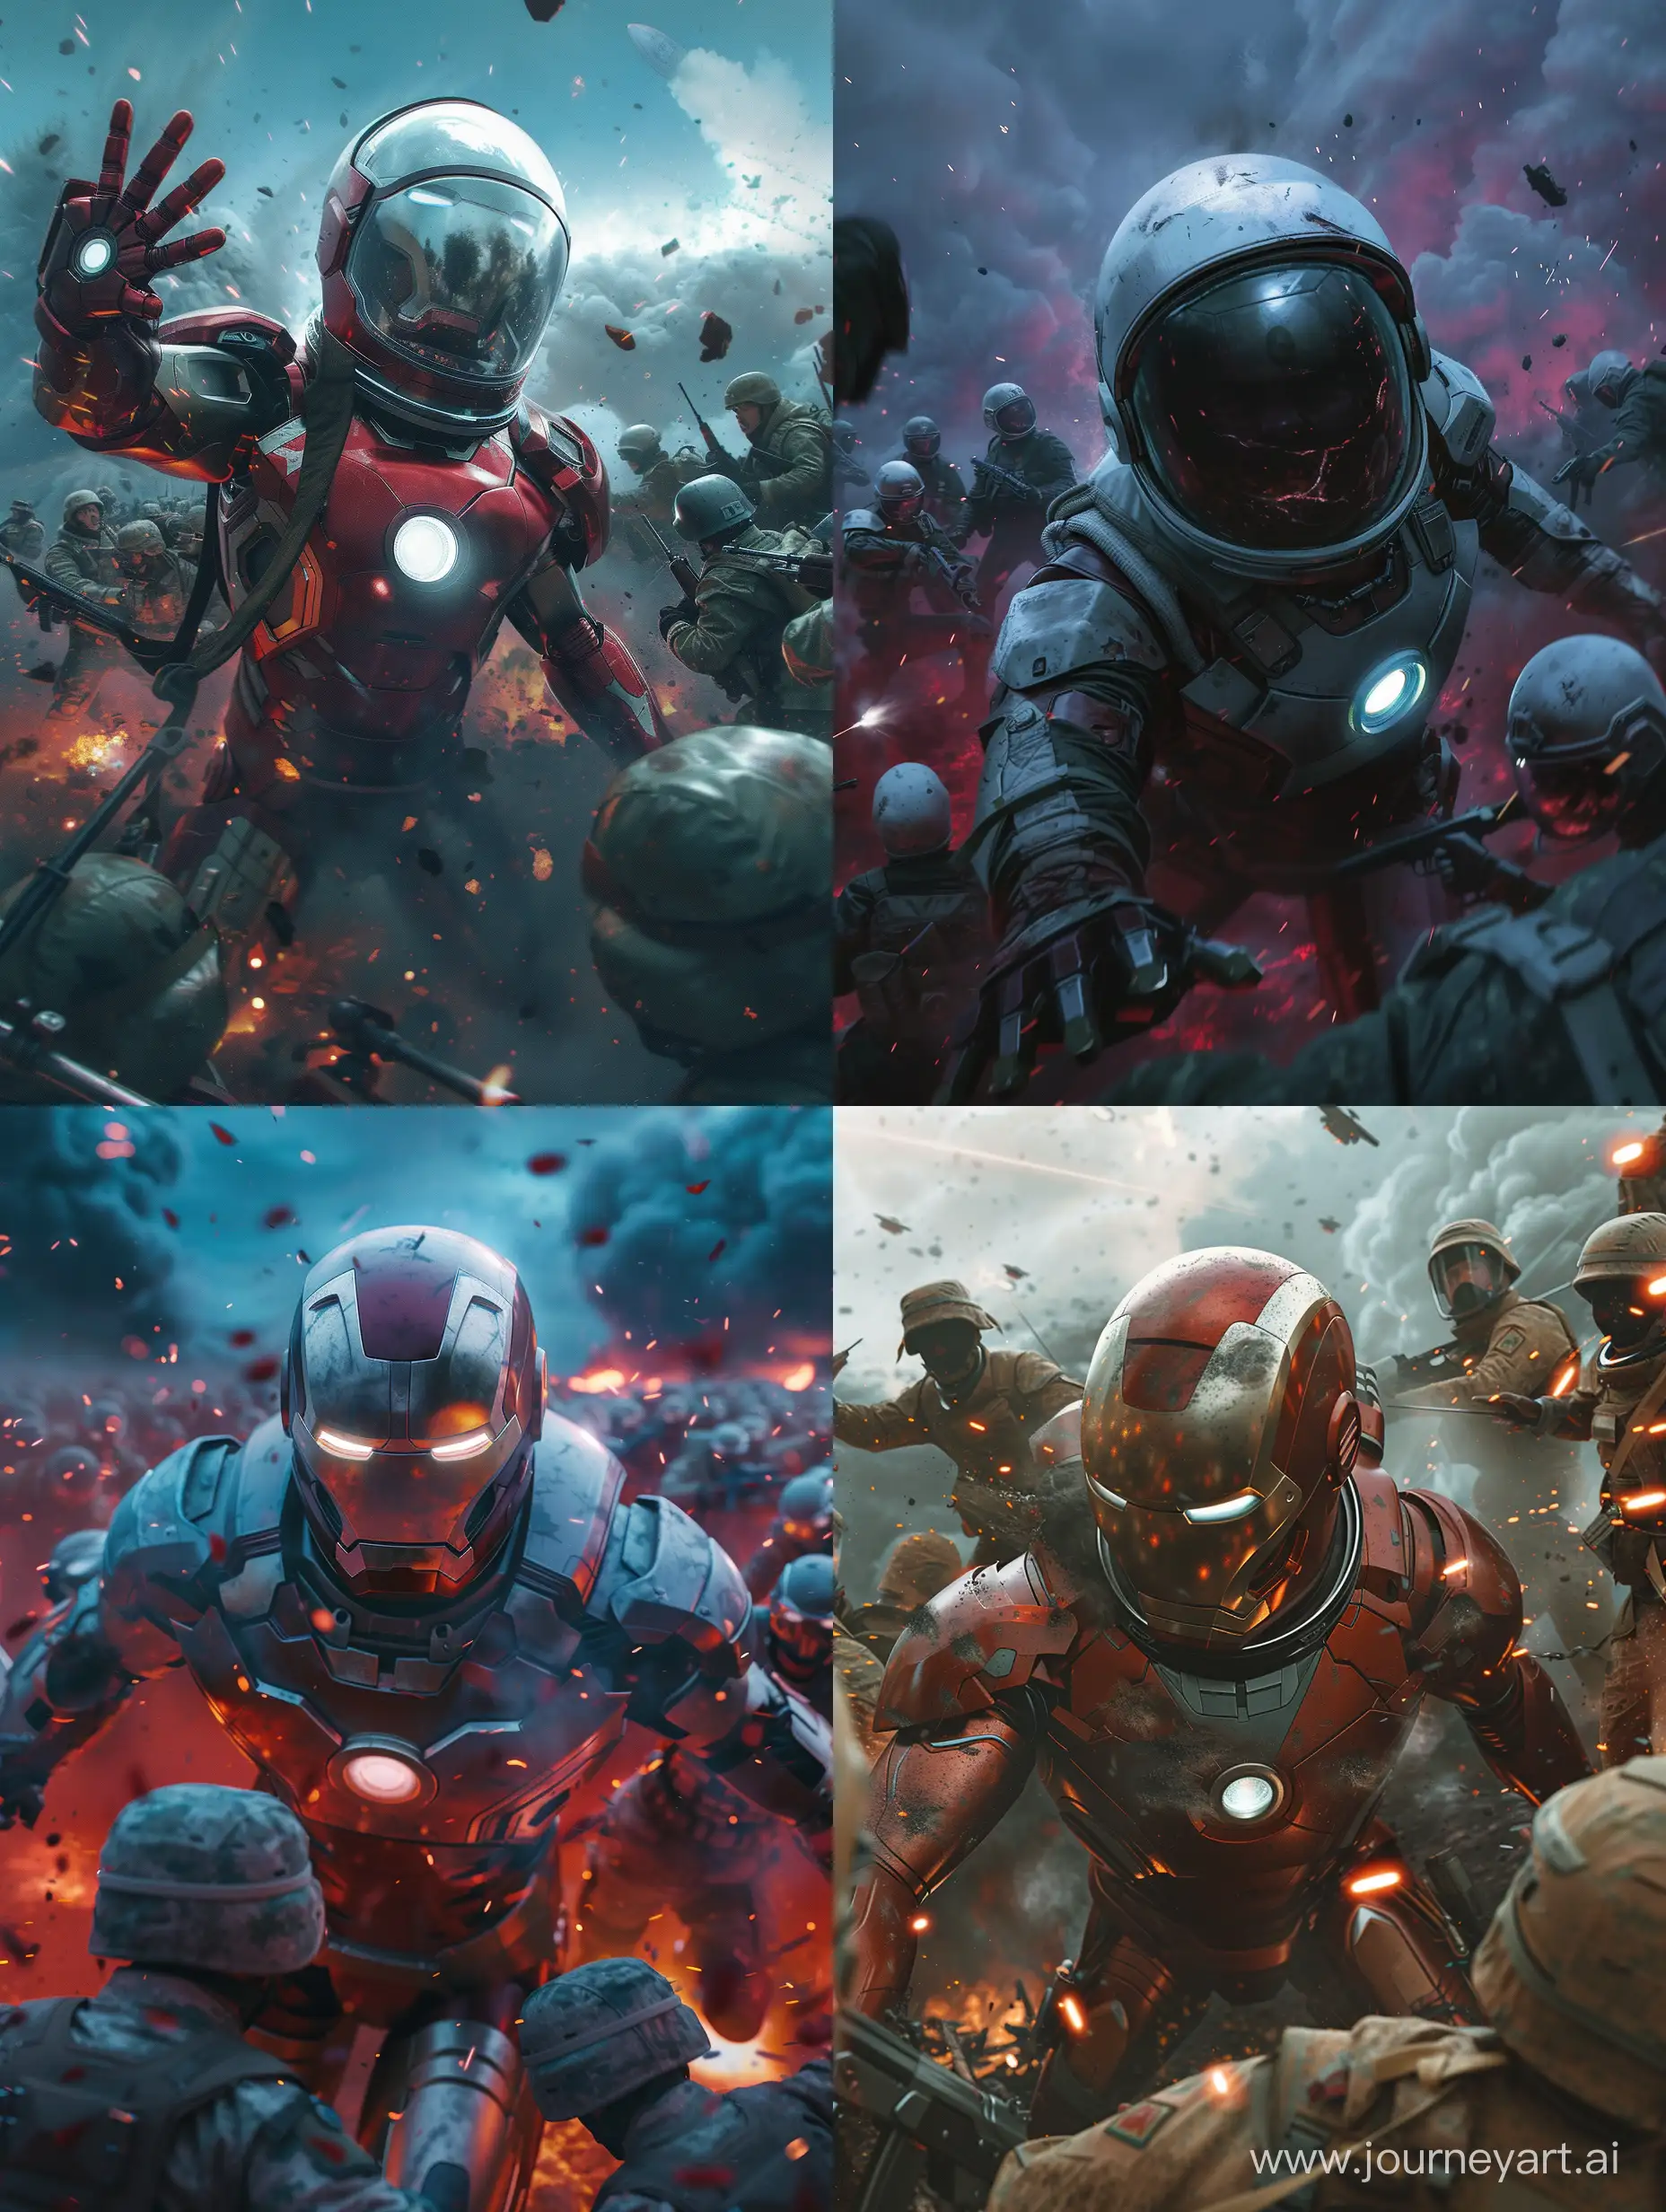 Ironman-in-Spacesuit-Battles-Russian-Soldiers-Amidst-Natural-Disasters